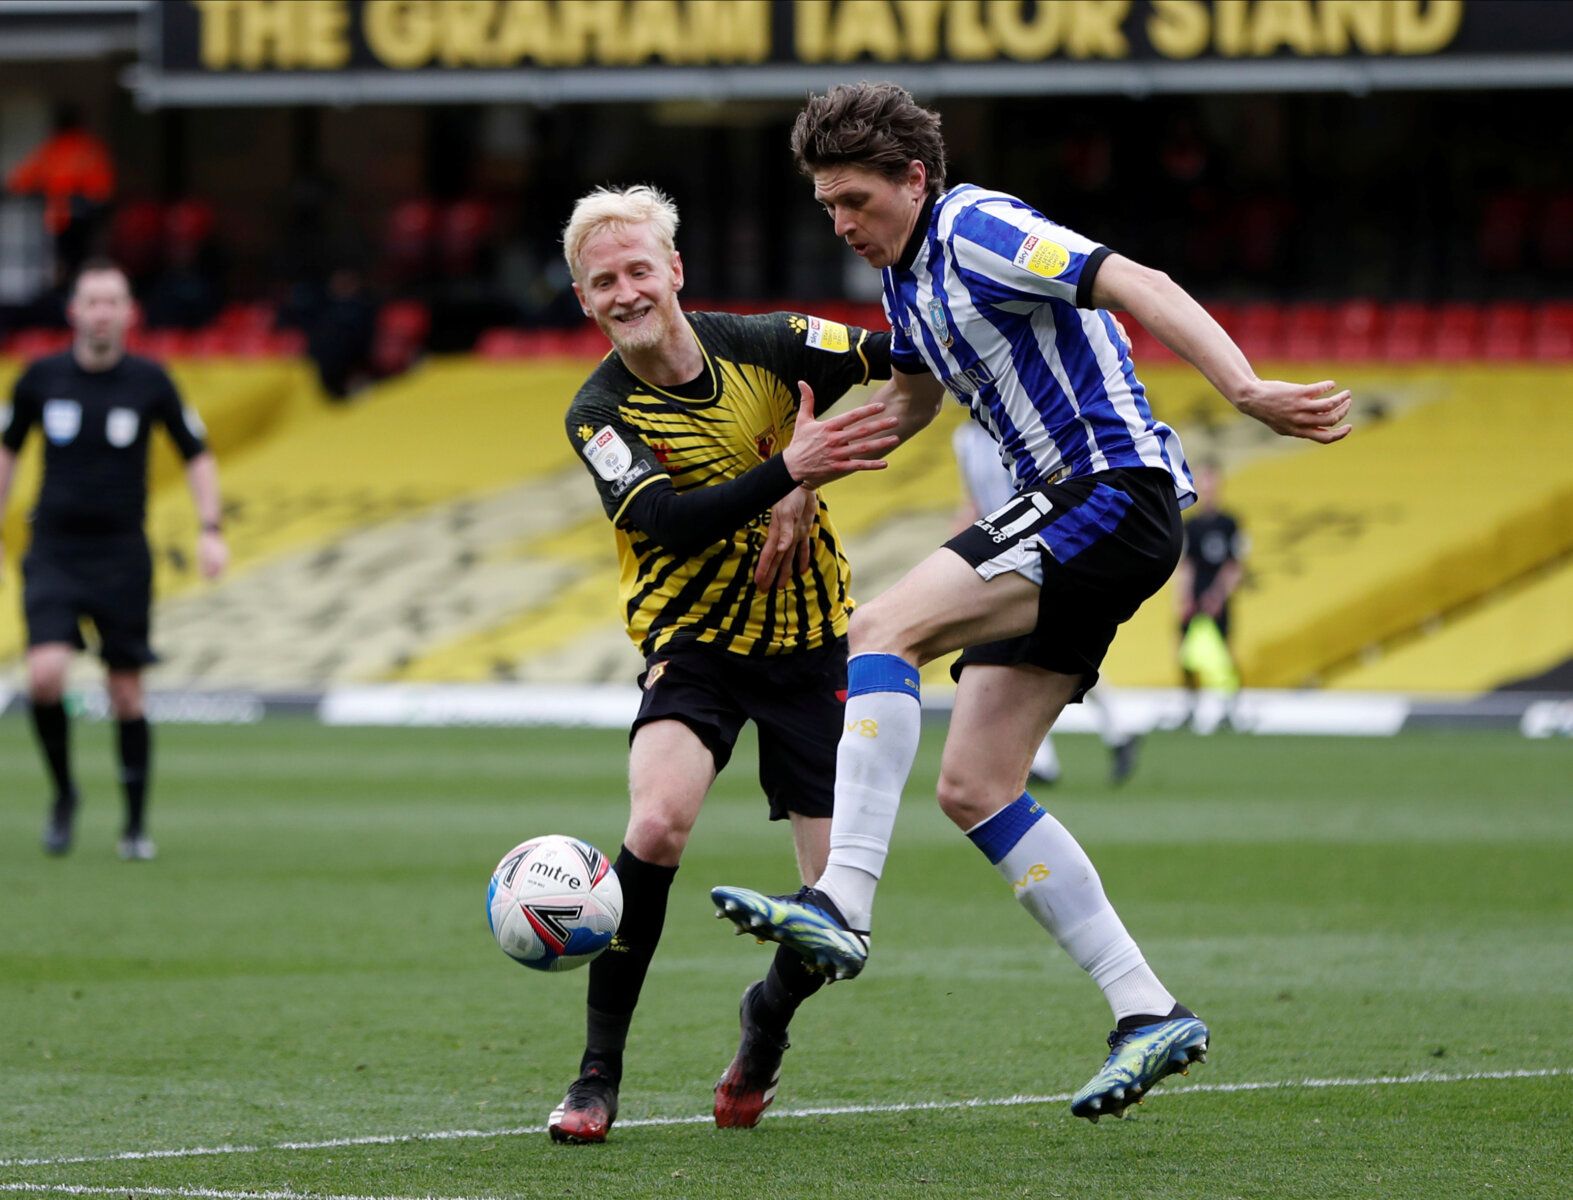 Soccer Football - Championship - Watford v Sheffield Wednesday - Vicarage Road, Watford, Britain - April 2, 2021  Watford's Will Hughes in action with Sheffield Wednesday's Adam Reach  Action Images/Paul Childs  EDITORIAL USE ONLY. No use with unauthorized audio, video, data, fixture lists, club/league logos or 